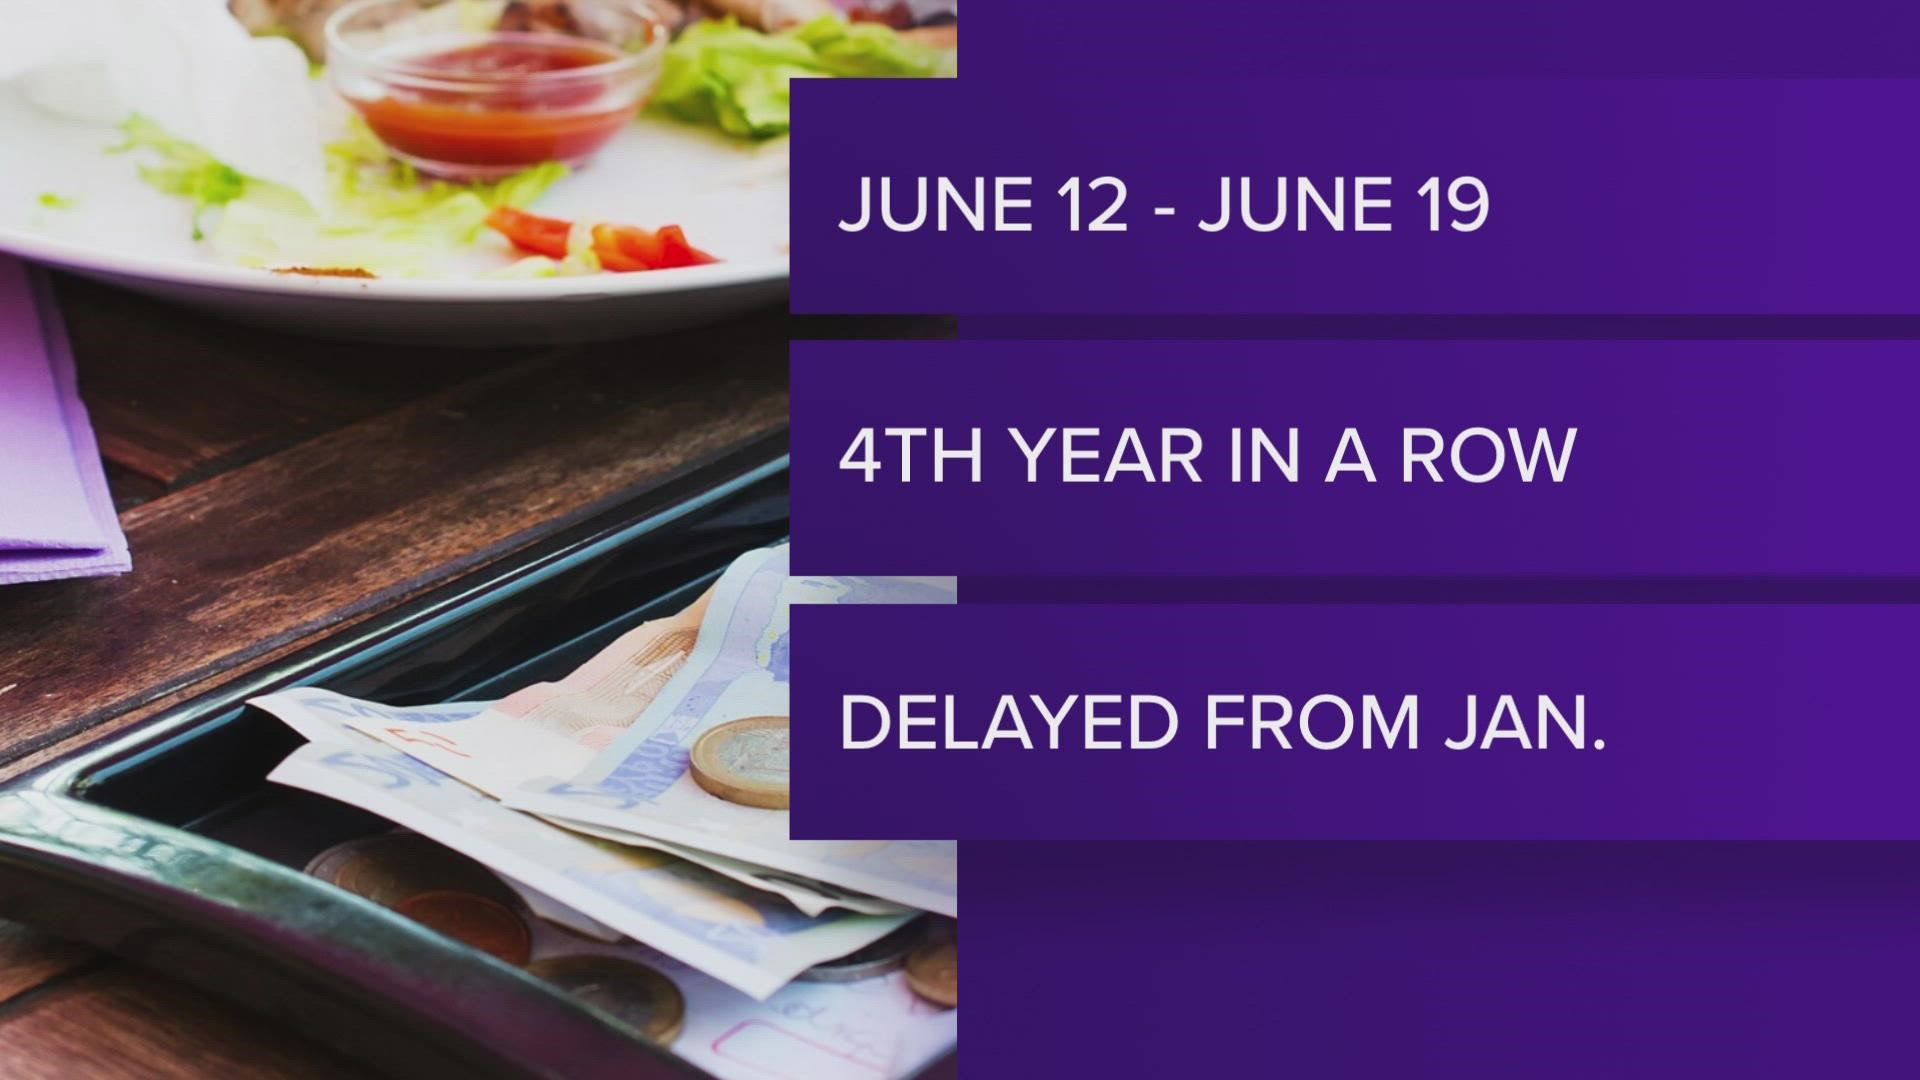 The week-long event is normally held in January, but the 4th annual iteration was delayed. It lasts from June 12 to June 19.